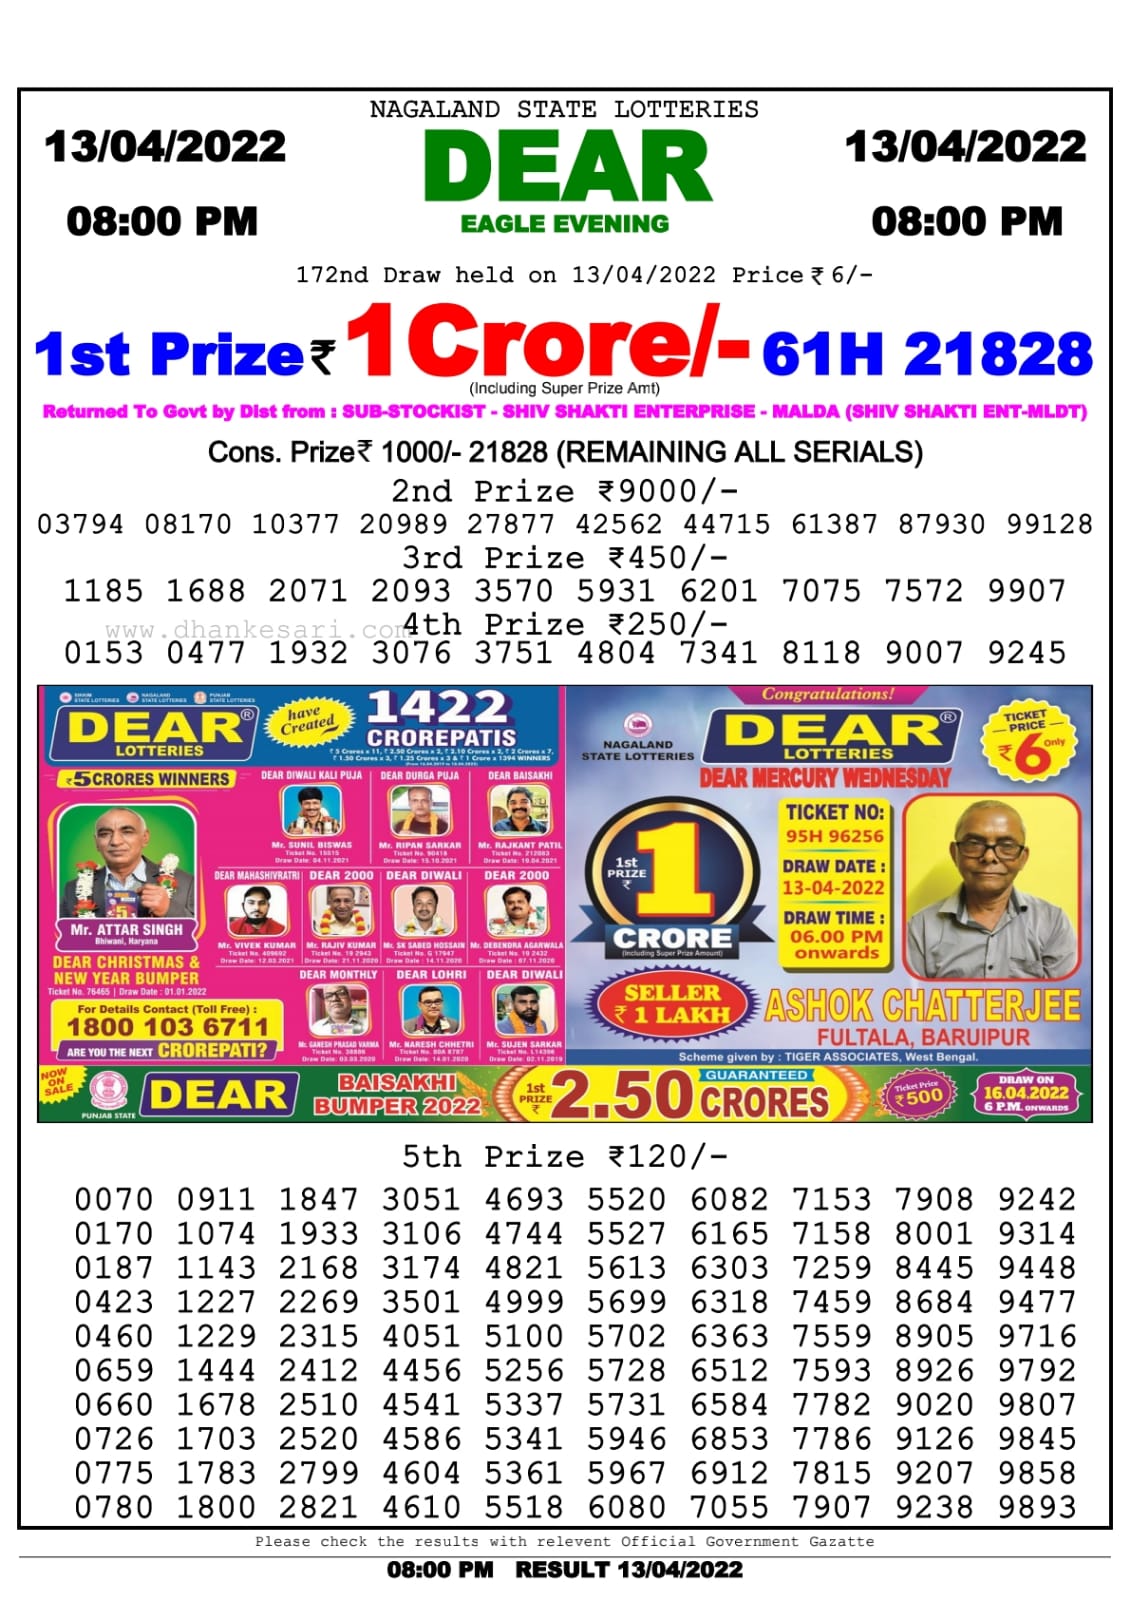 Dear Lottery Nagaland state Lottery Results 08.00 pm 13.04.2022